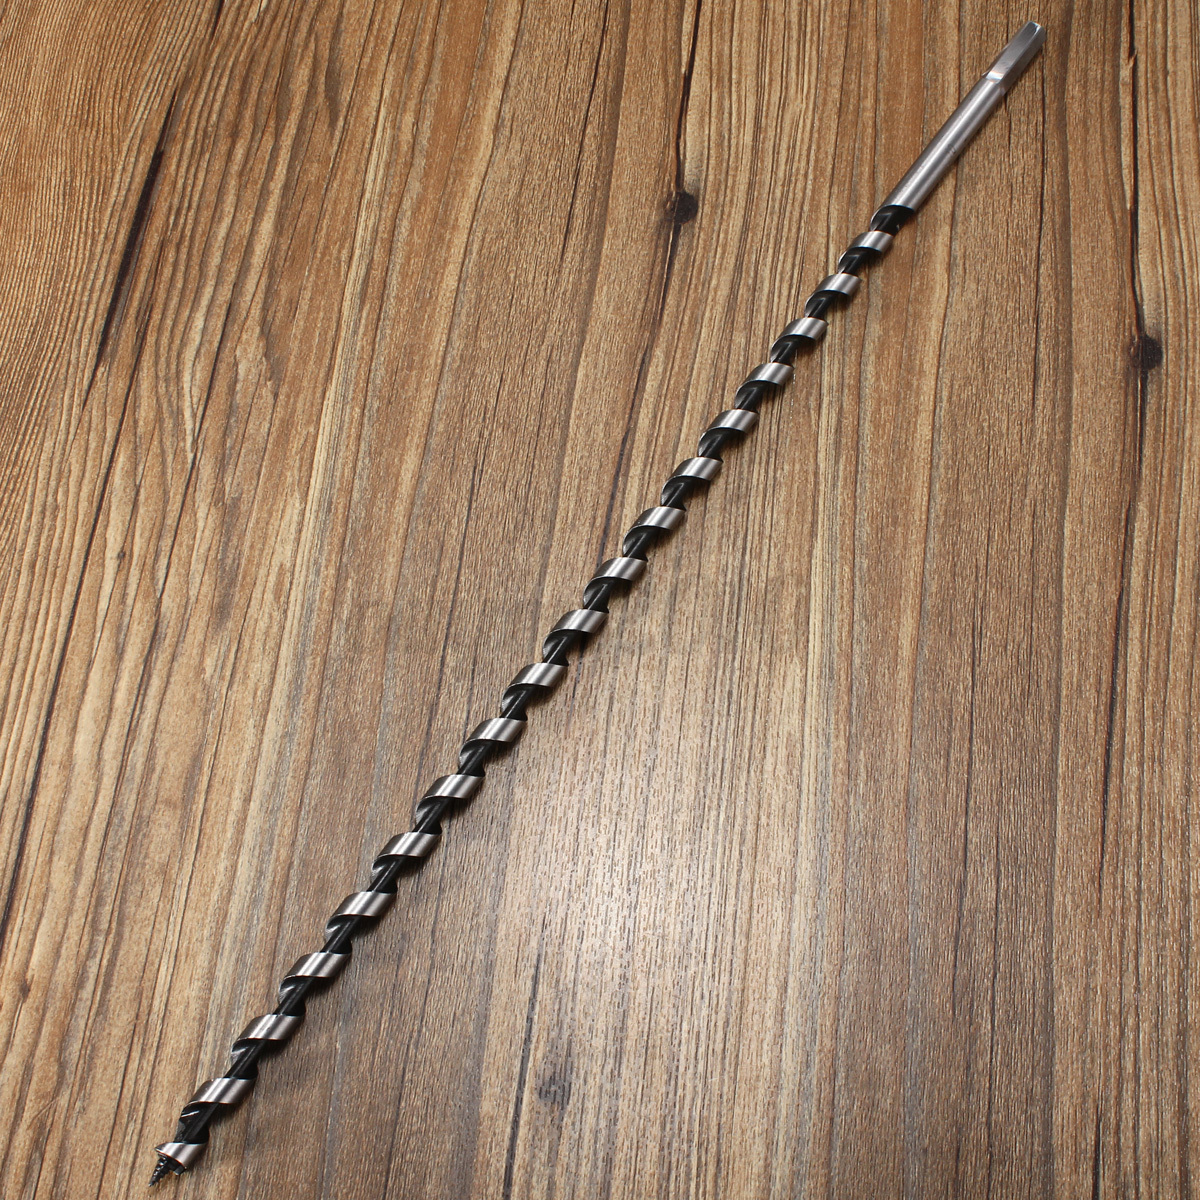 Long woodworking drill bits